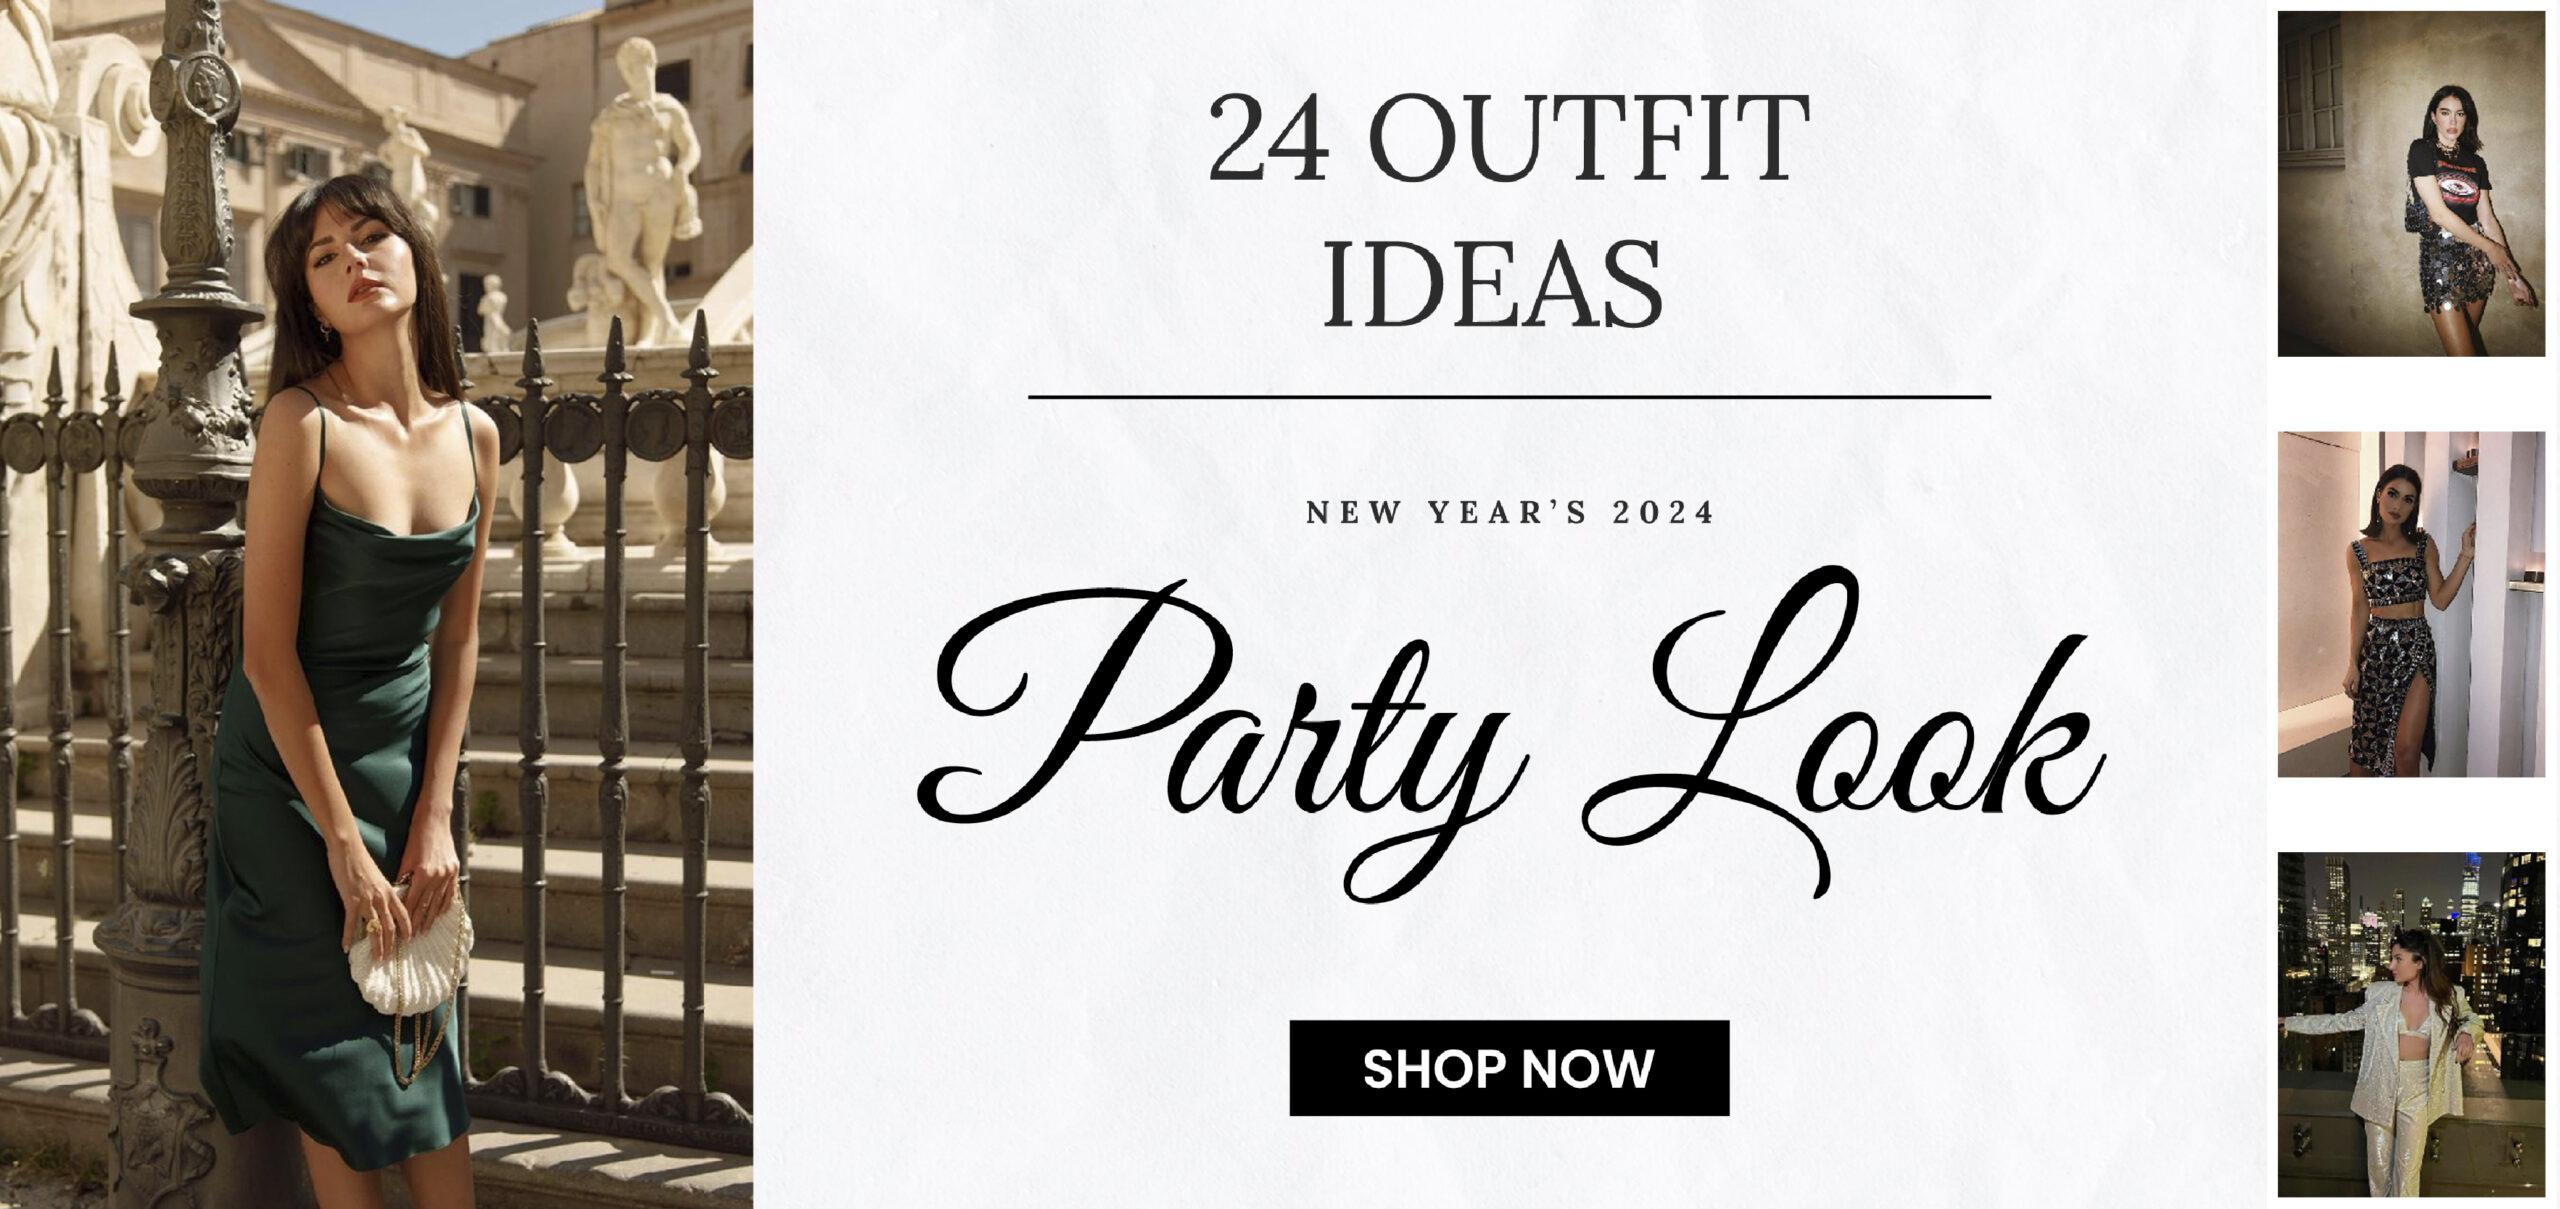 outfit ideas for new year's eve party